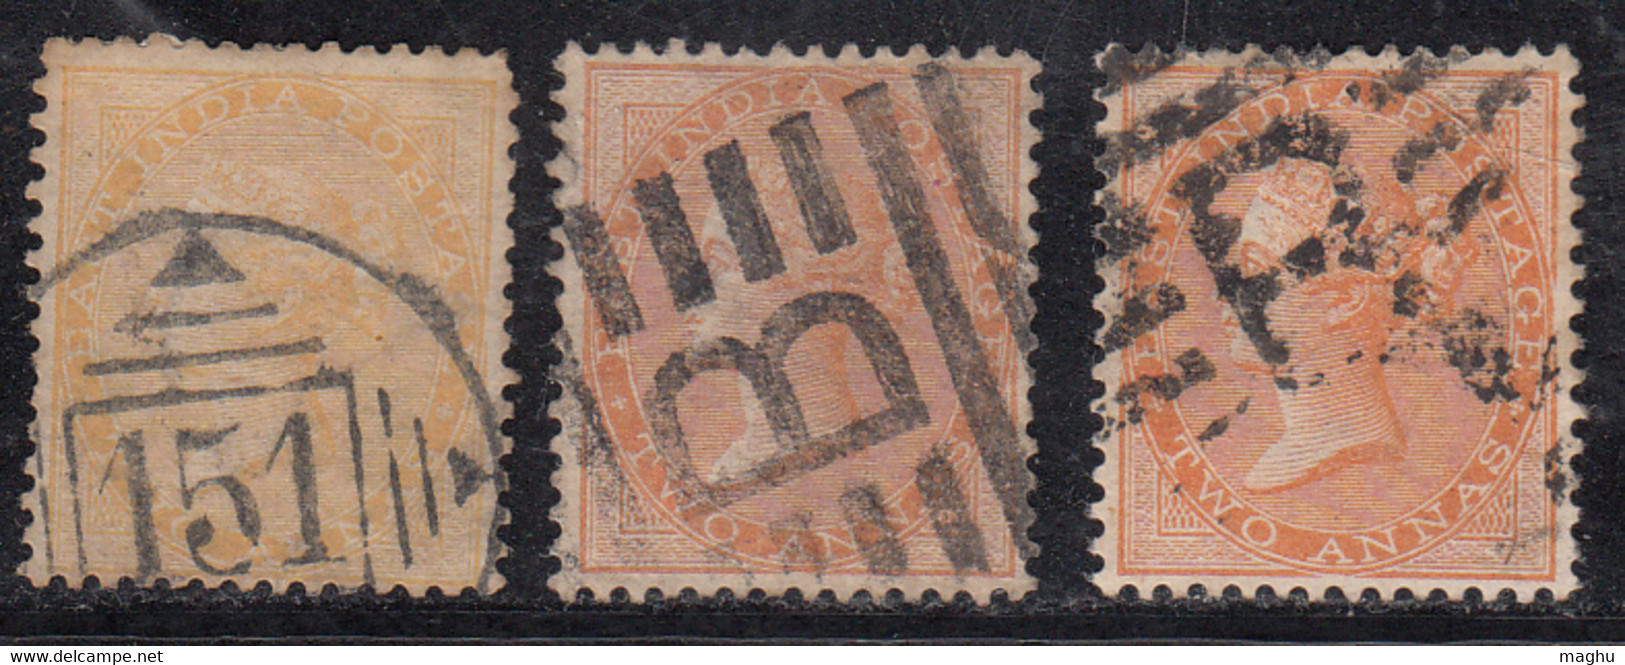 3 Diff., Shades, 1856 British East India Used, Two Annas Shades, 2a No Watermark - 1854 Britse Indische Compagnie